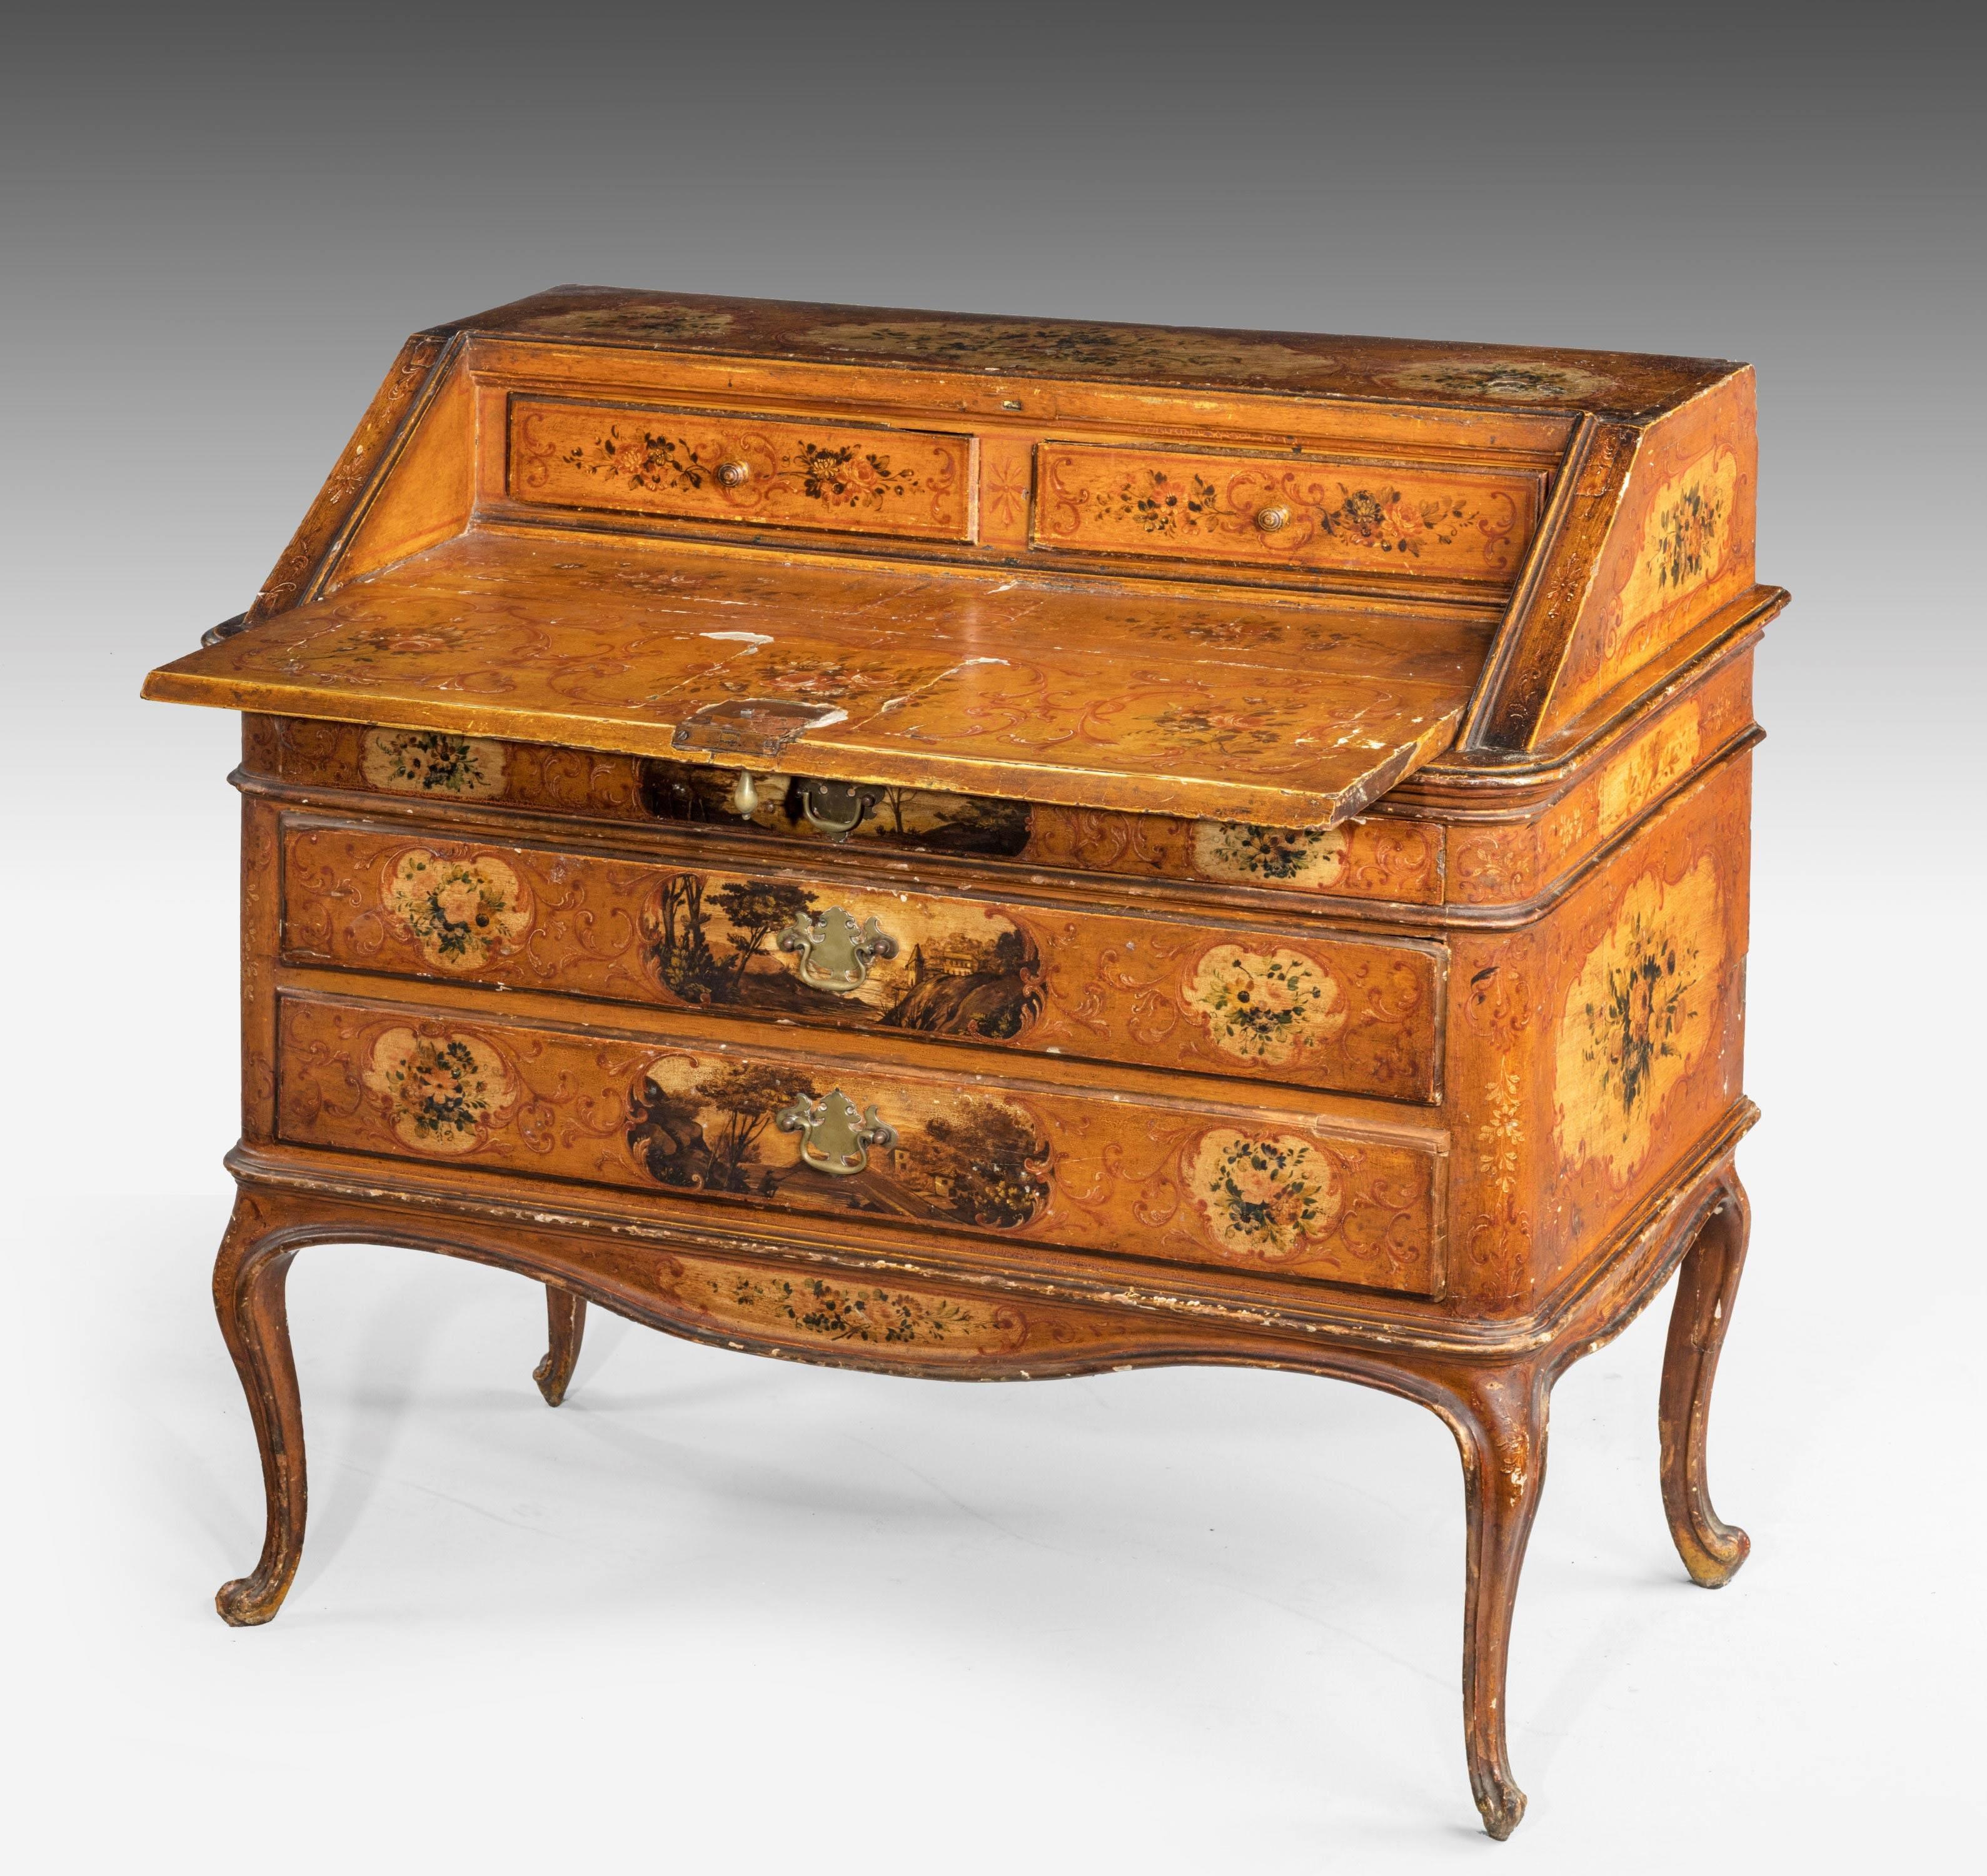 Wood Mid-18th Century Venetian Lacquered and Gilded Bureau